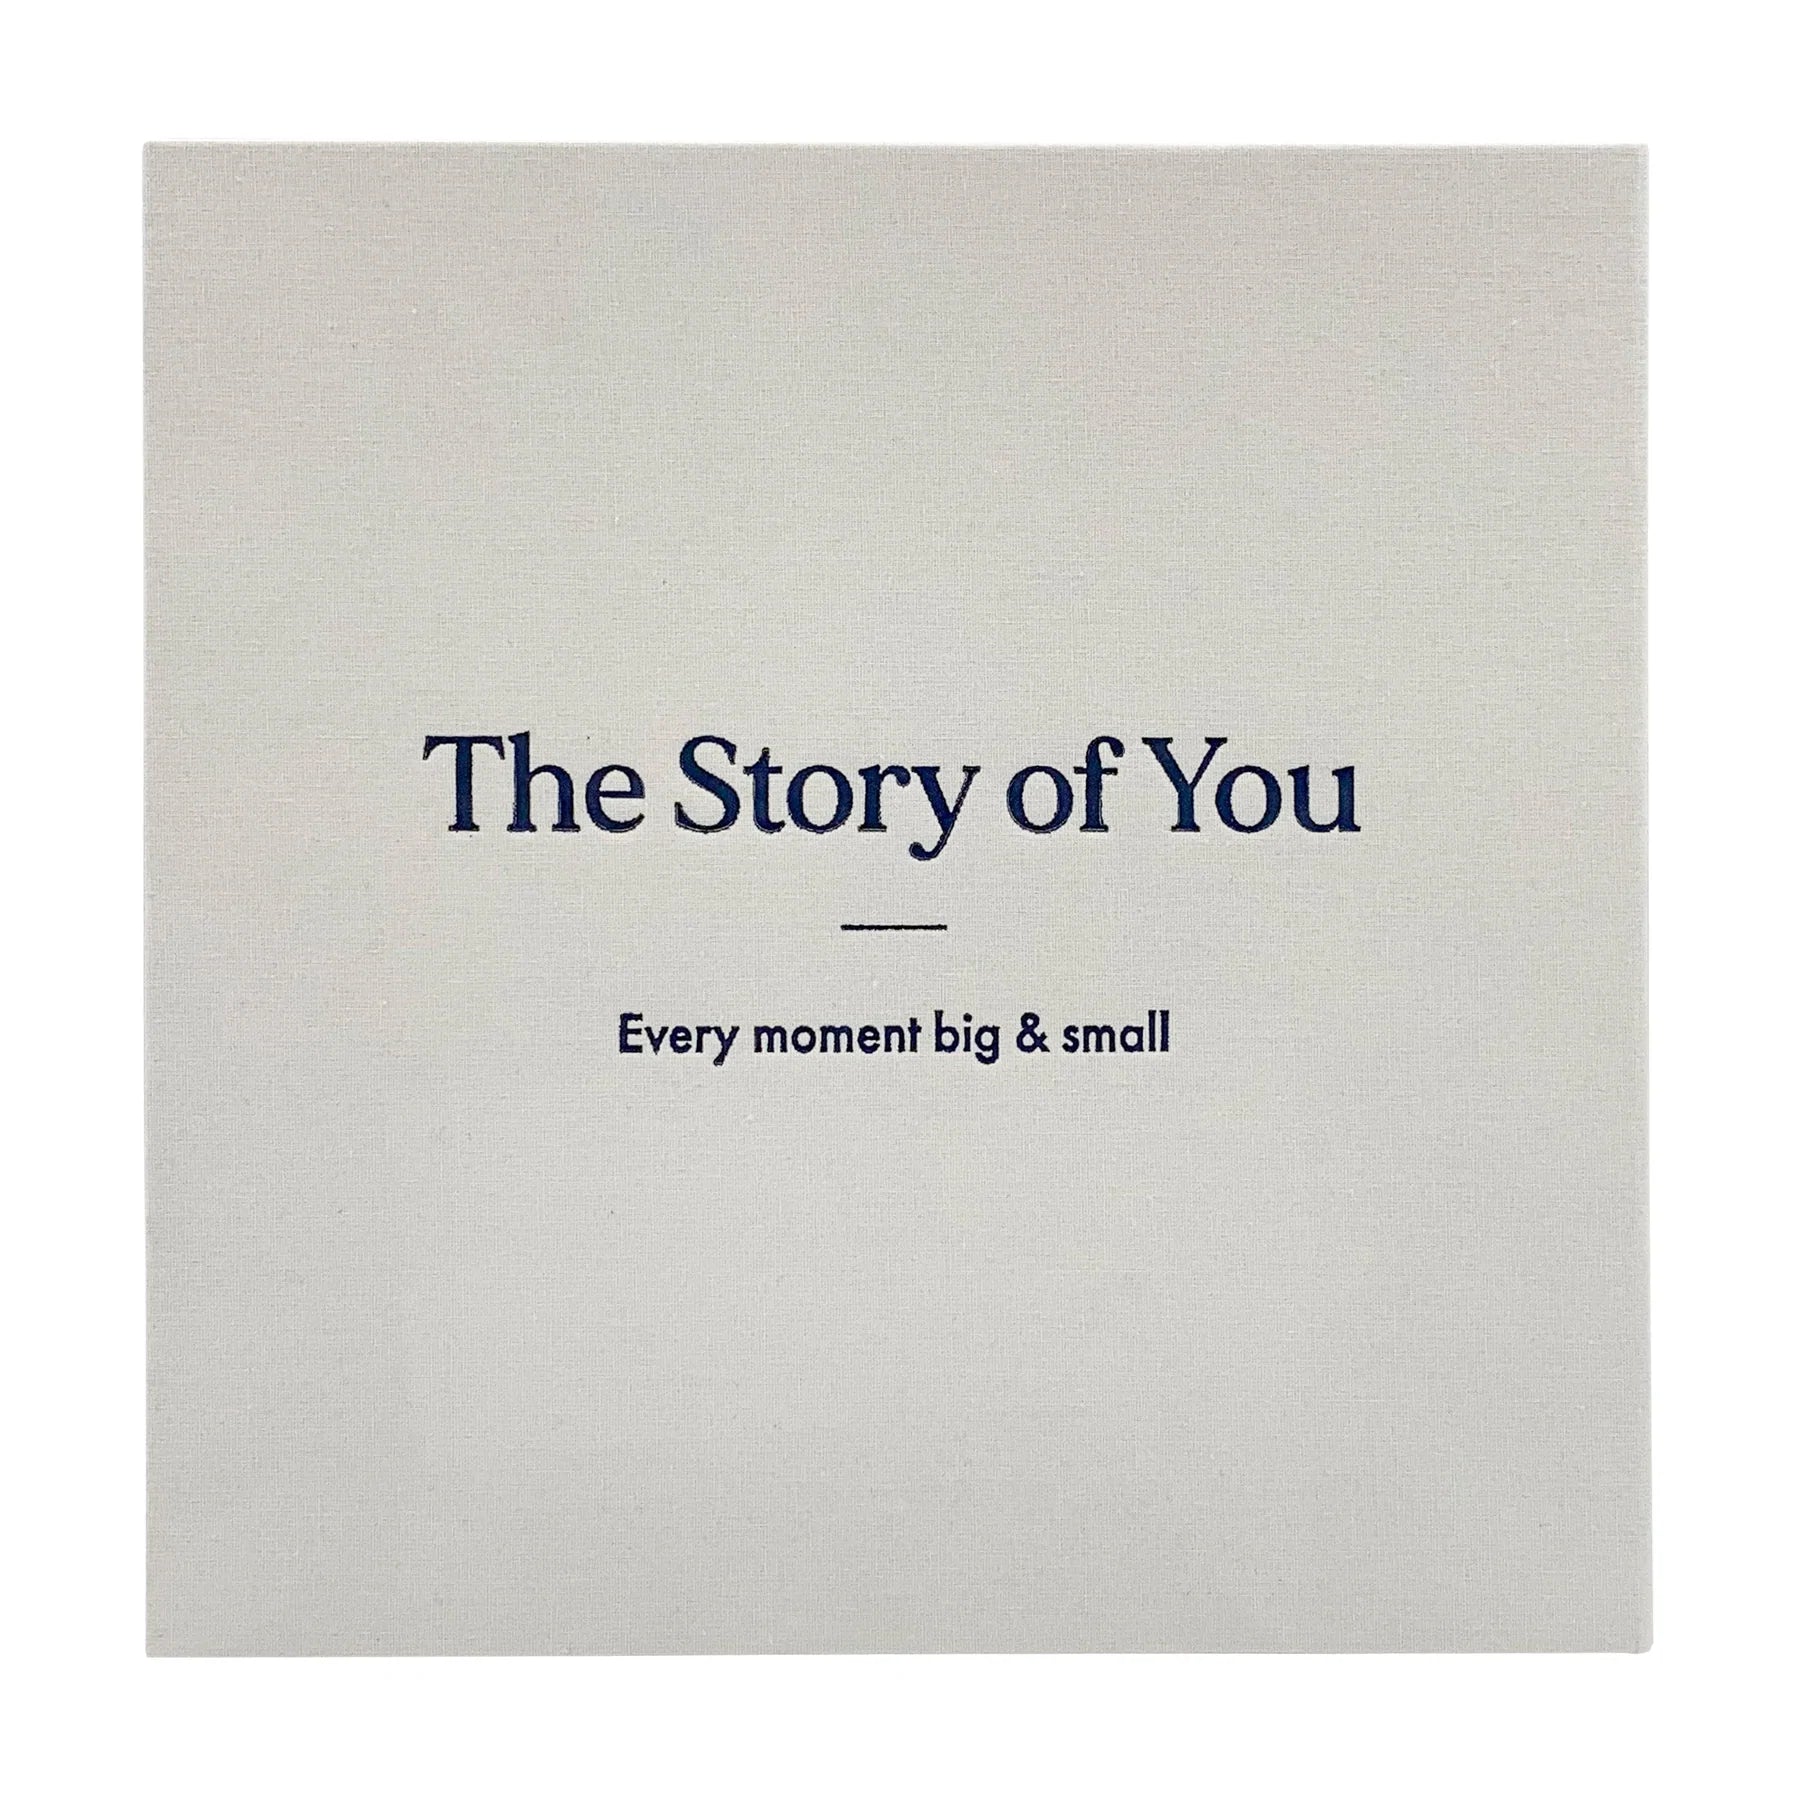 Profile The Story of You Slip-in Display Photo Album